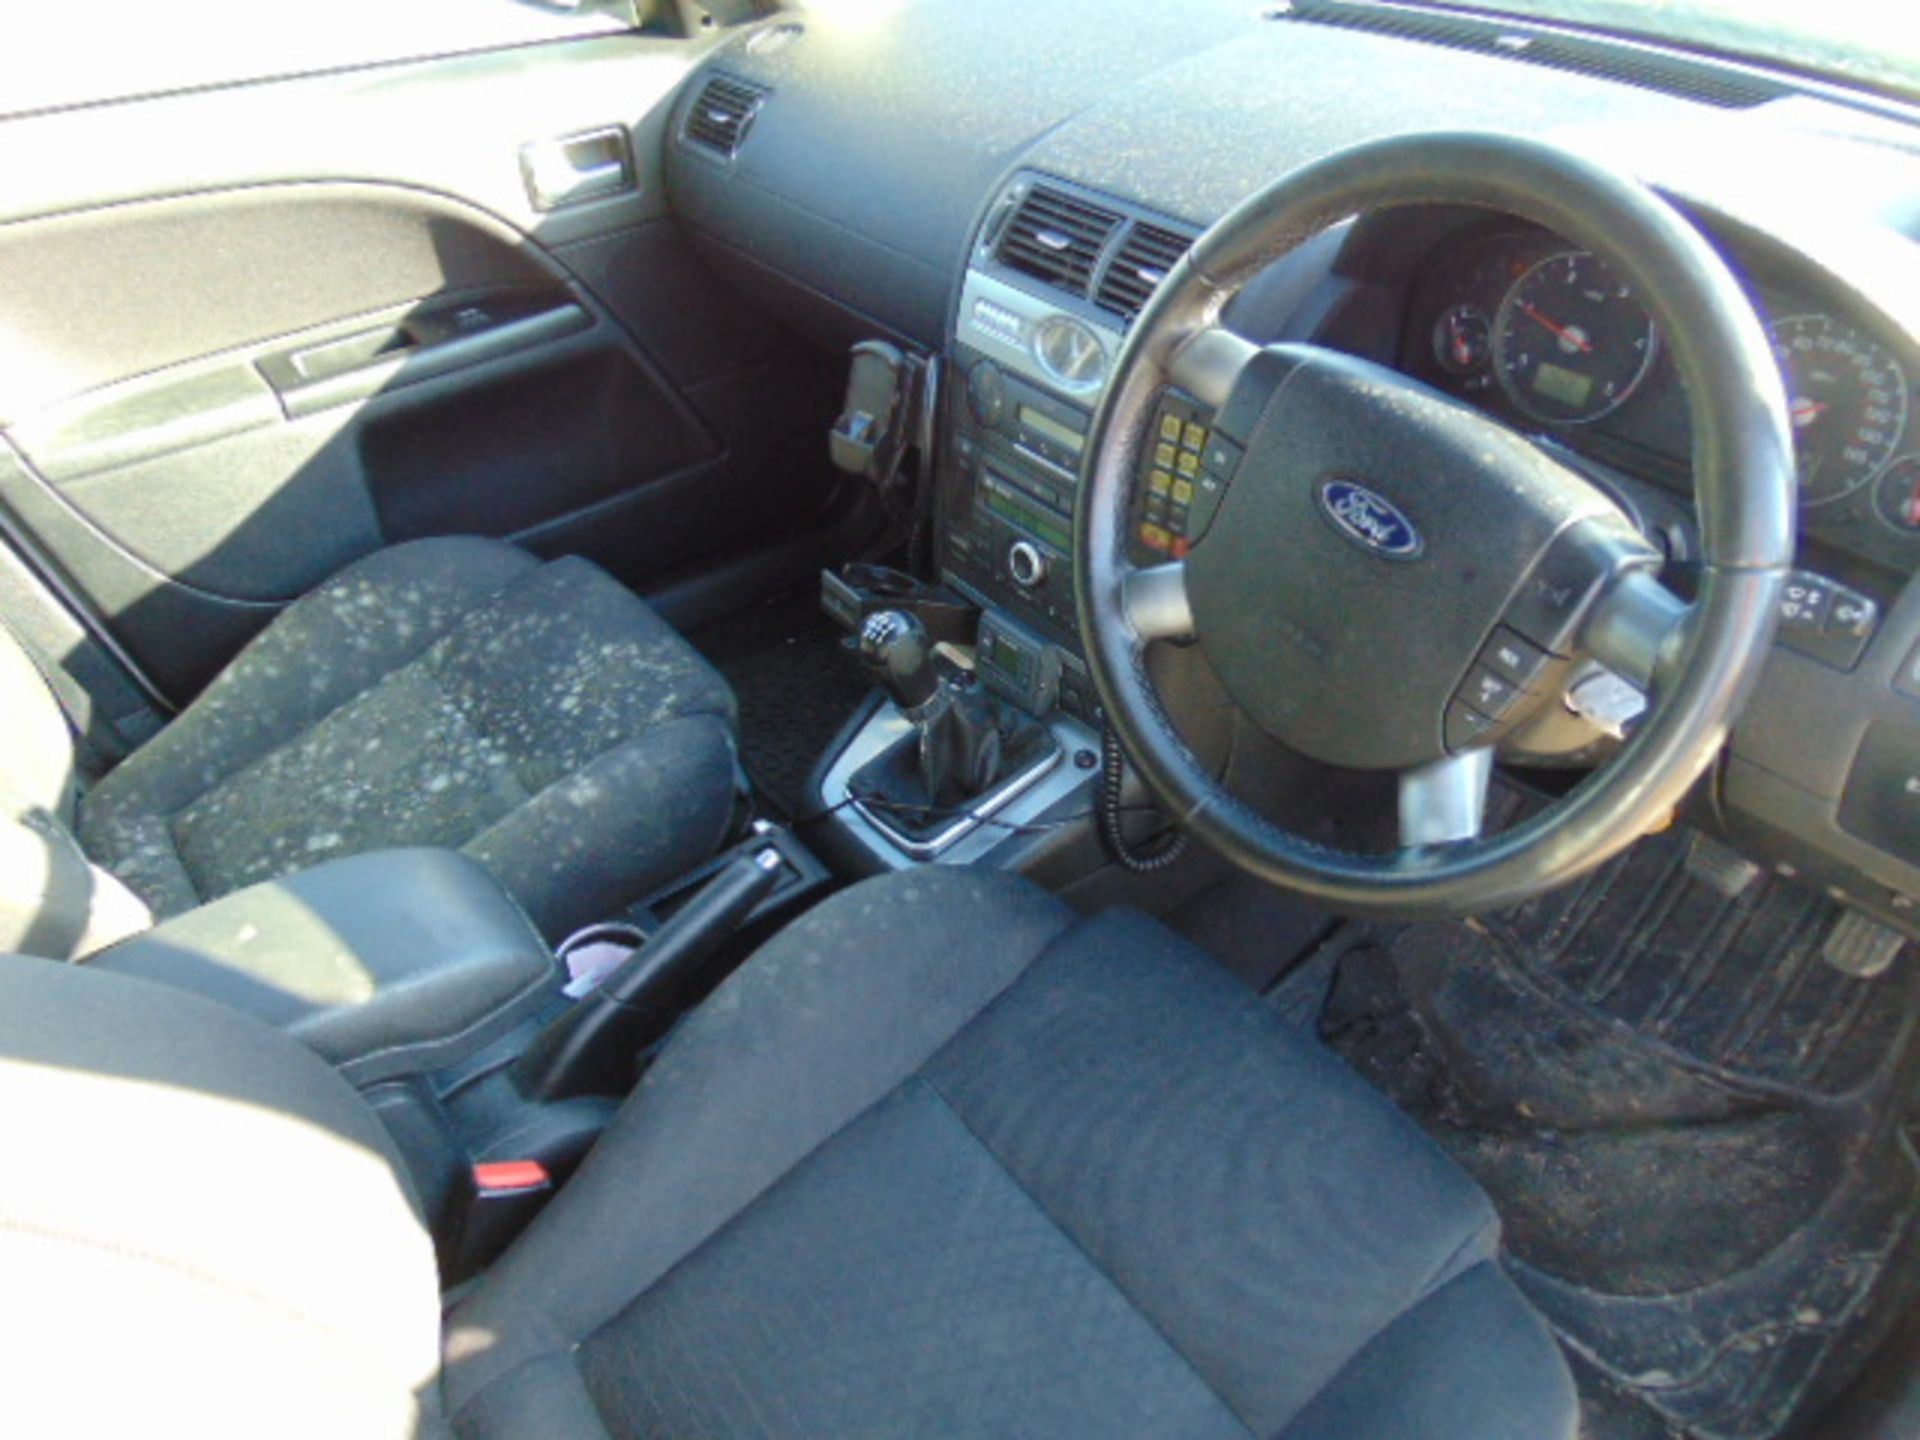 Ford Mondeo 2.0 Turbo diesel ambulance - Image 12 of 14